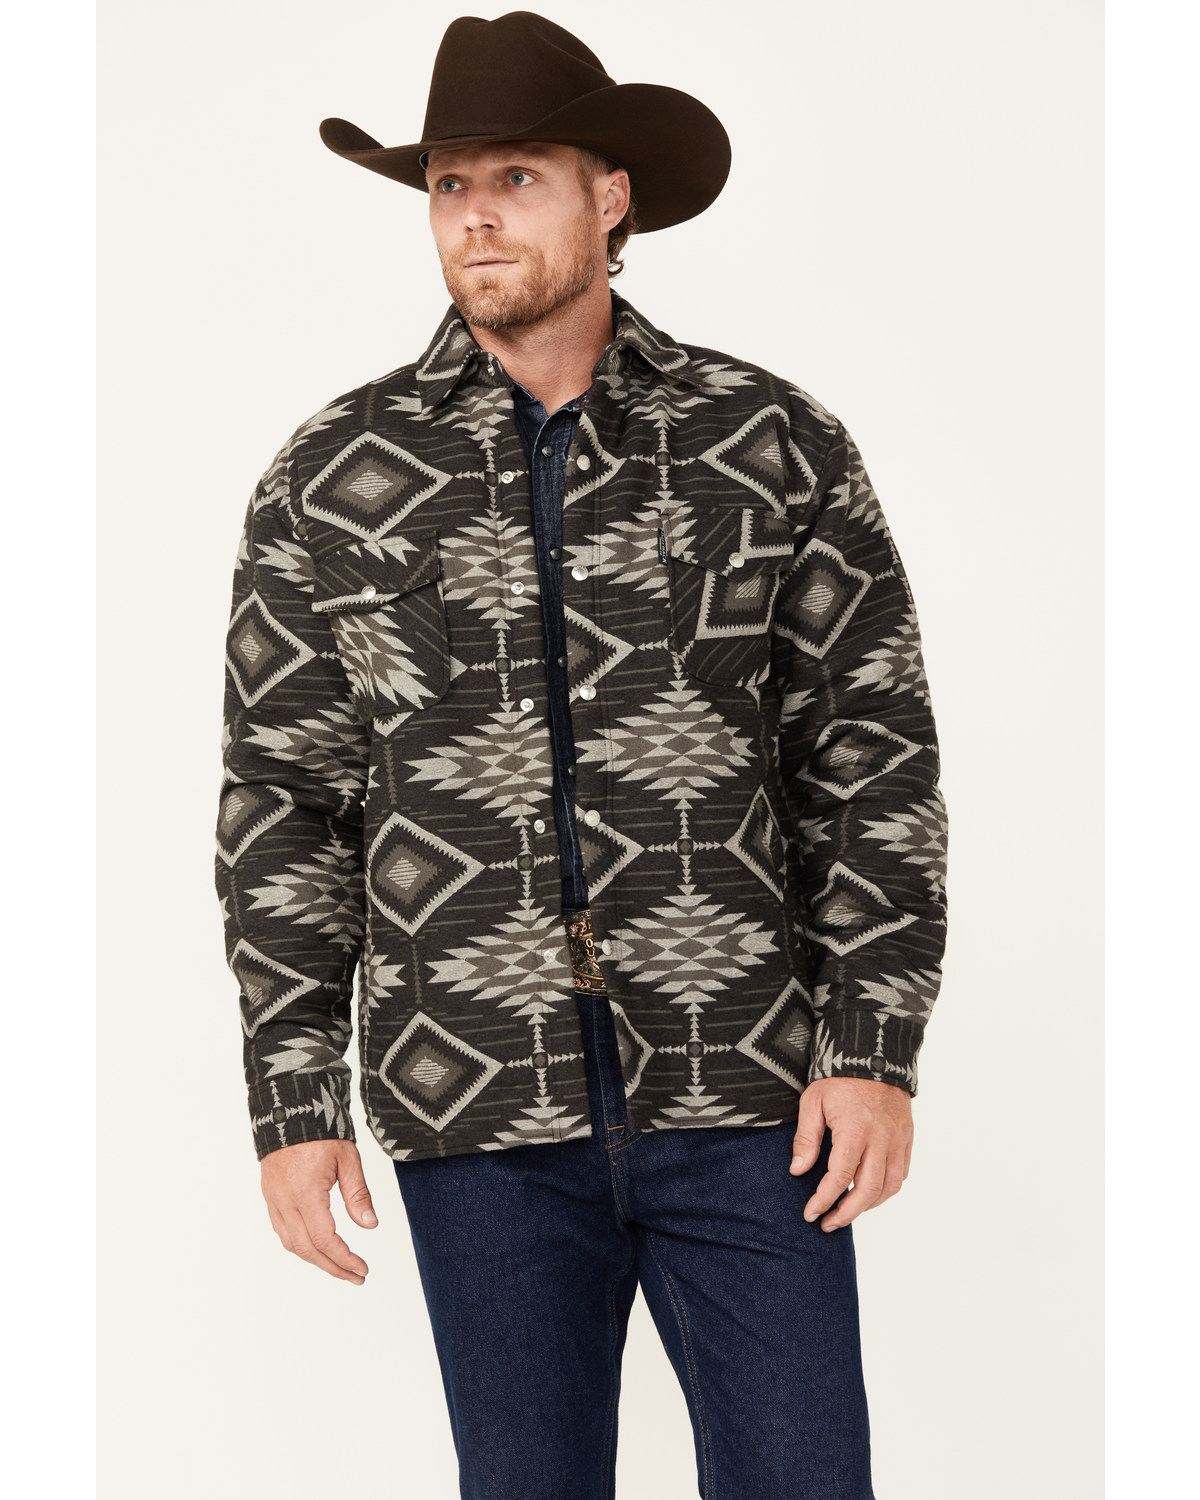 Outback Trading Co Men's Southwestern Print Lined Snap Shirt Jacket